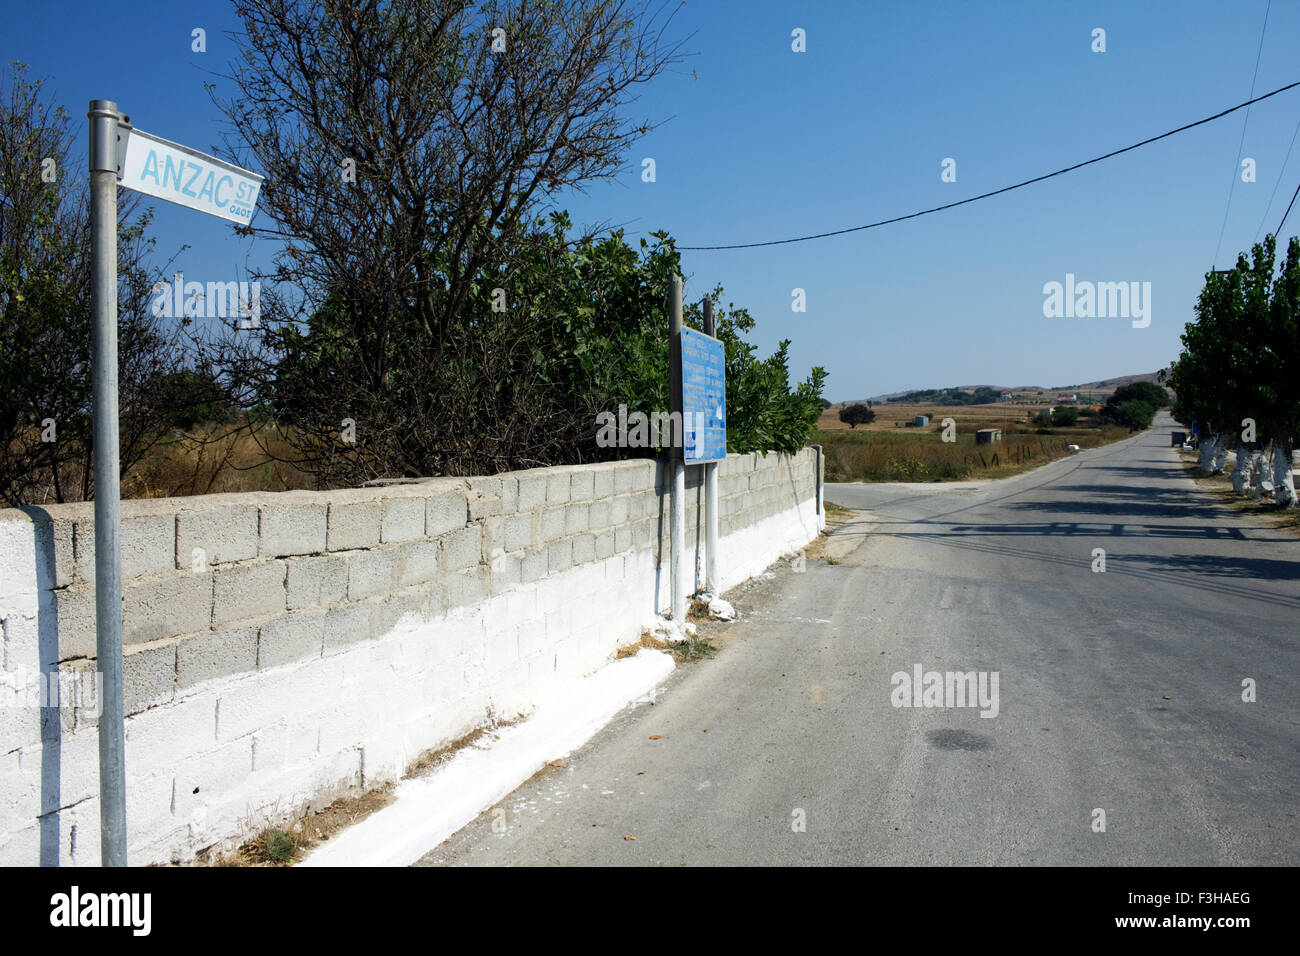 The begining of Anzac street and its road sign (right) pointing to the Commonwealth War Graves Commission East Mudros cemetery. Stock Photo